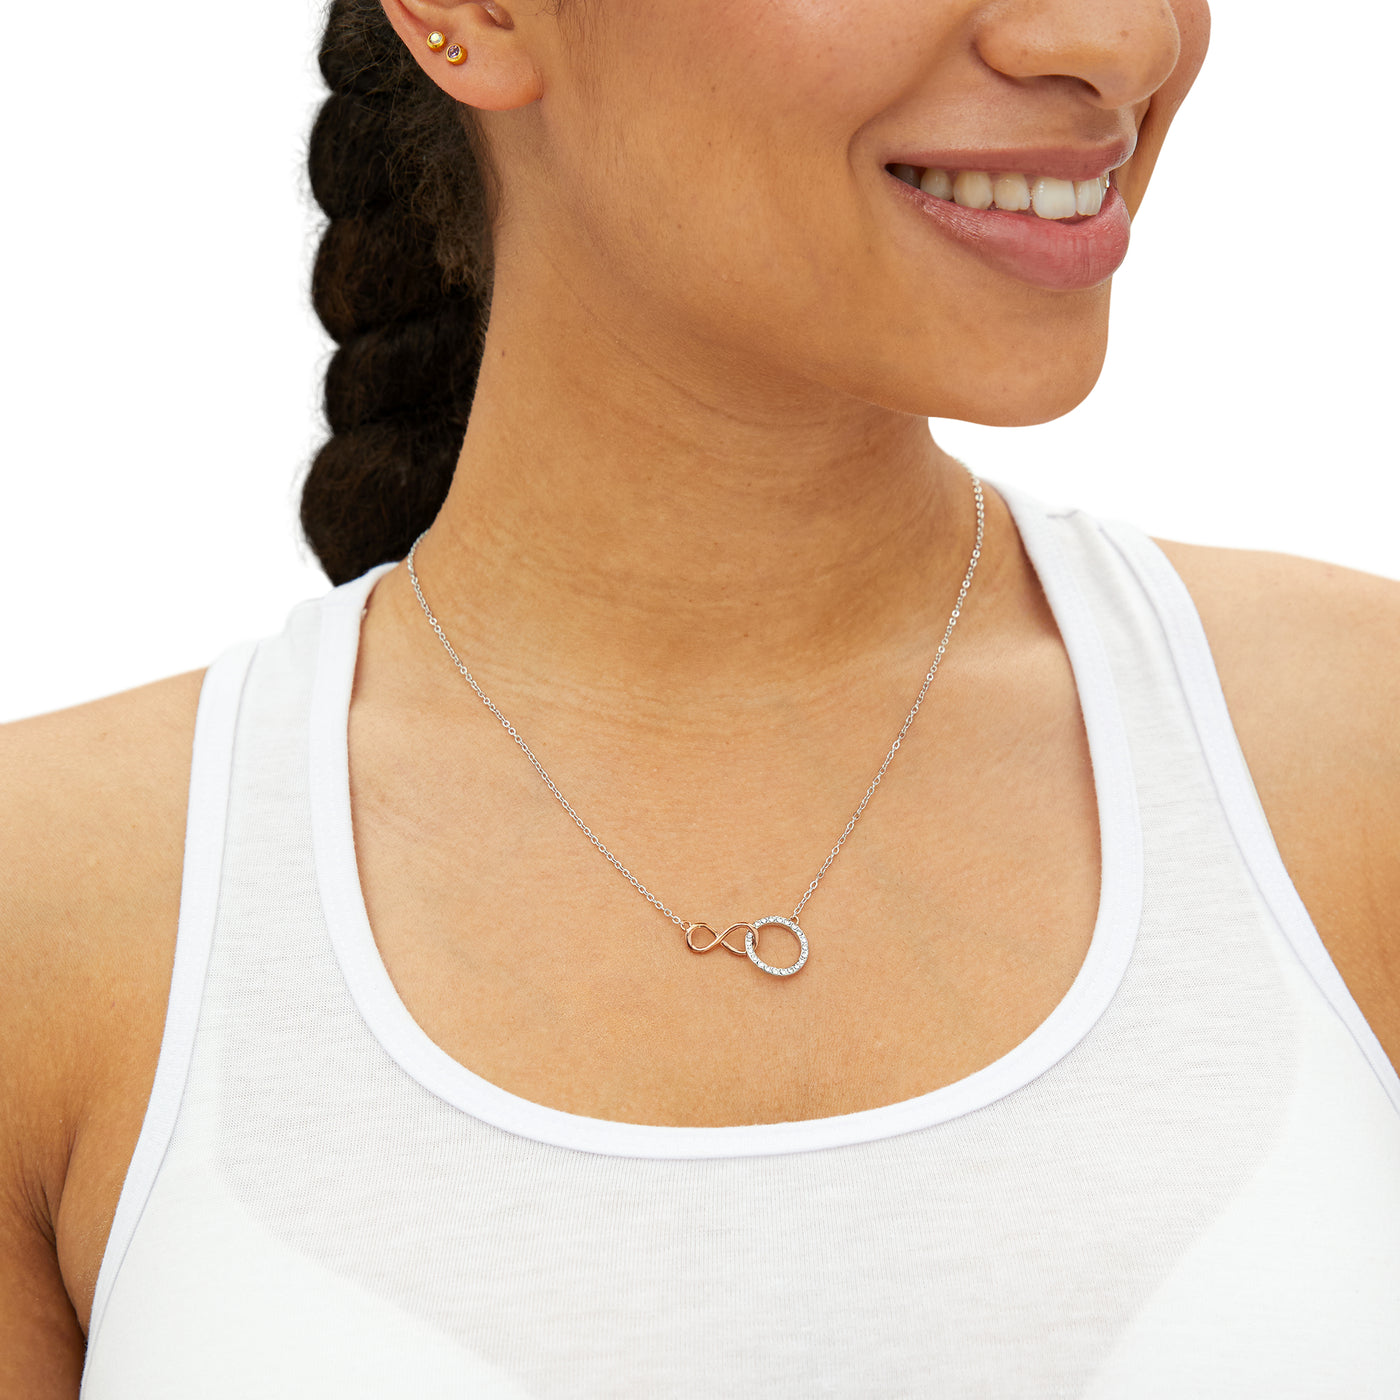 INFINIY JOURNEY SOULMATE Infinity Circle Necklace